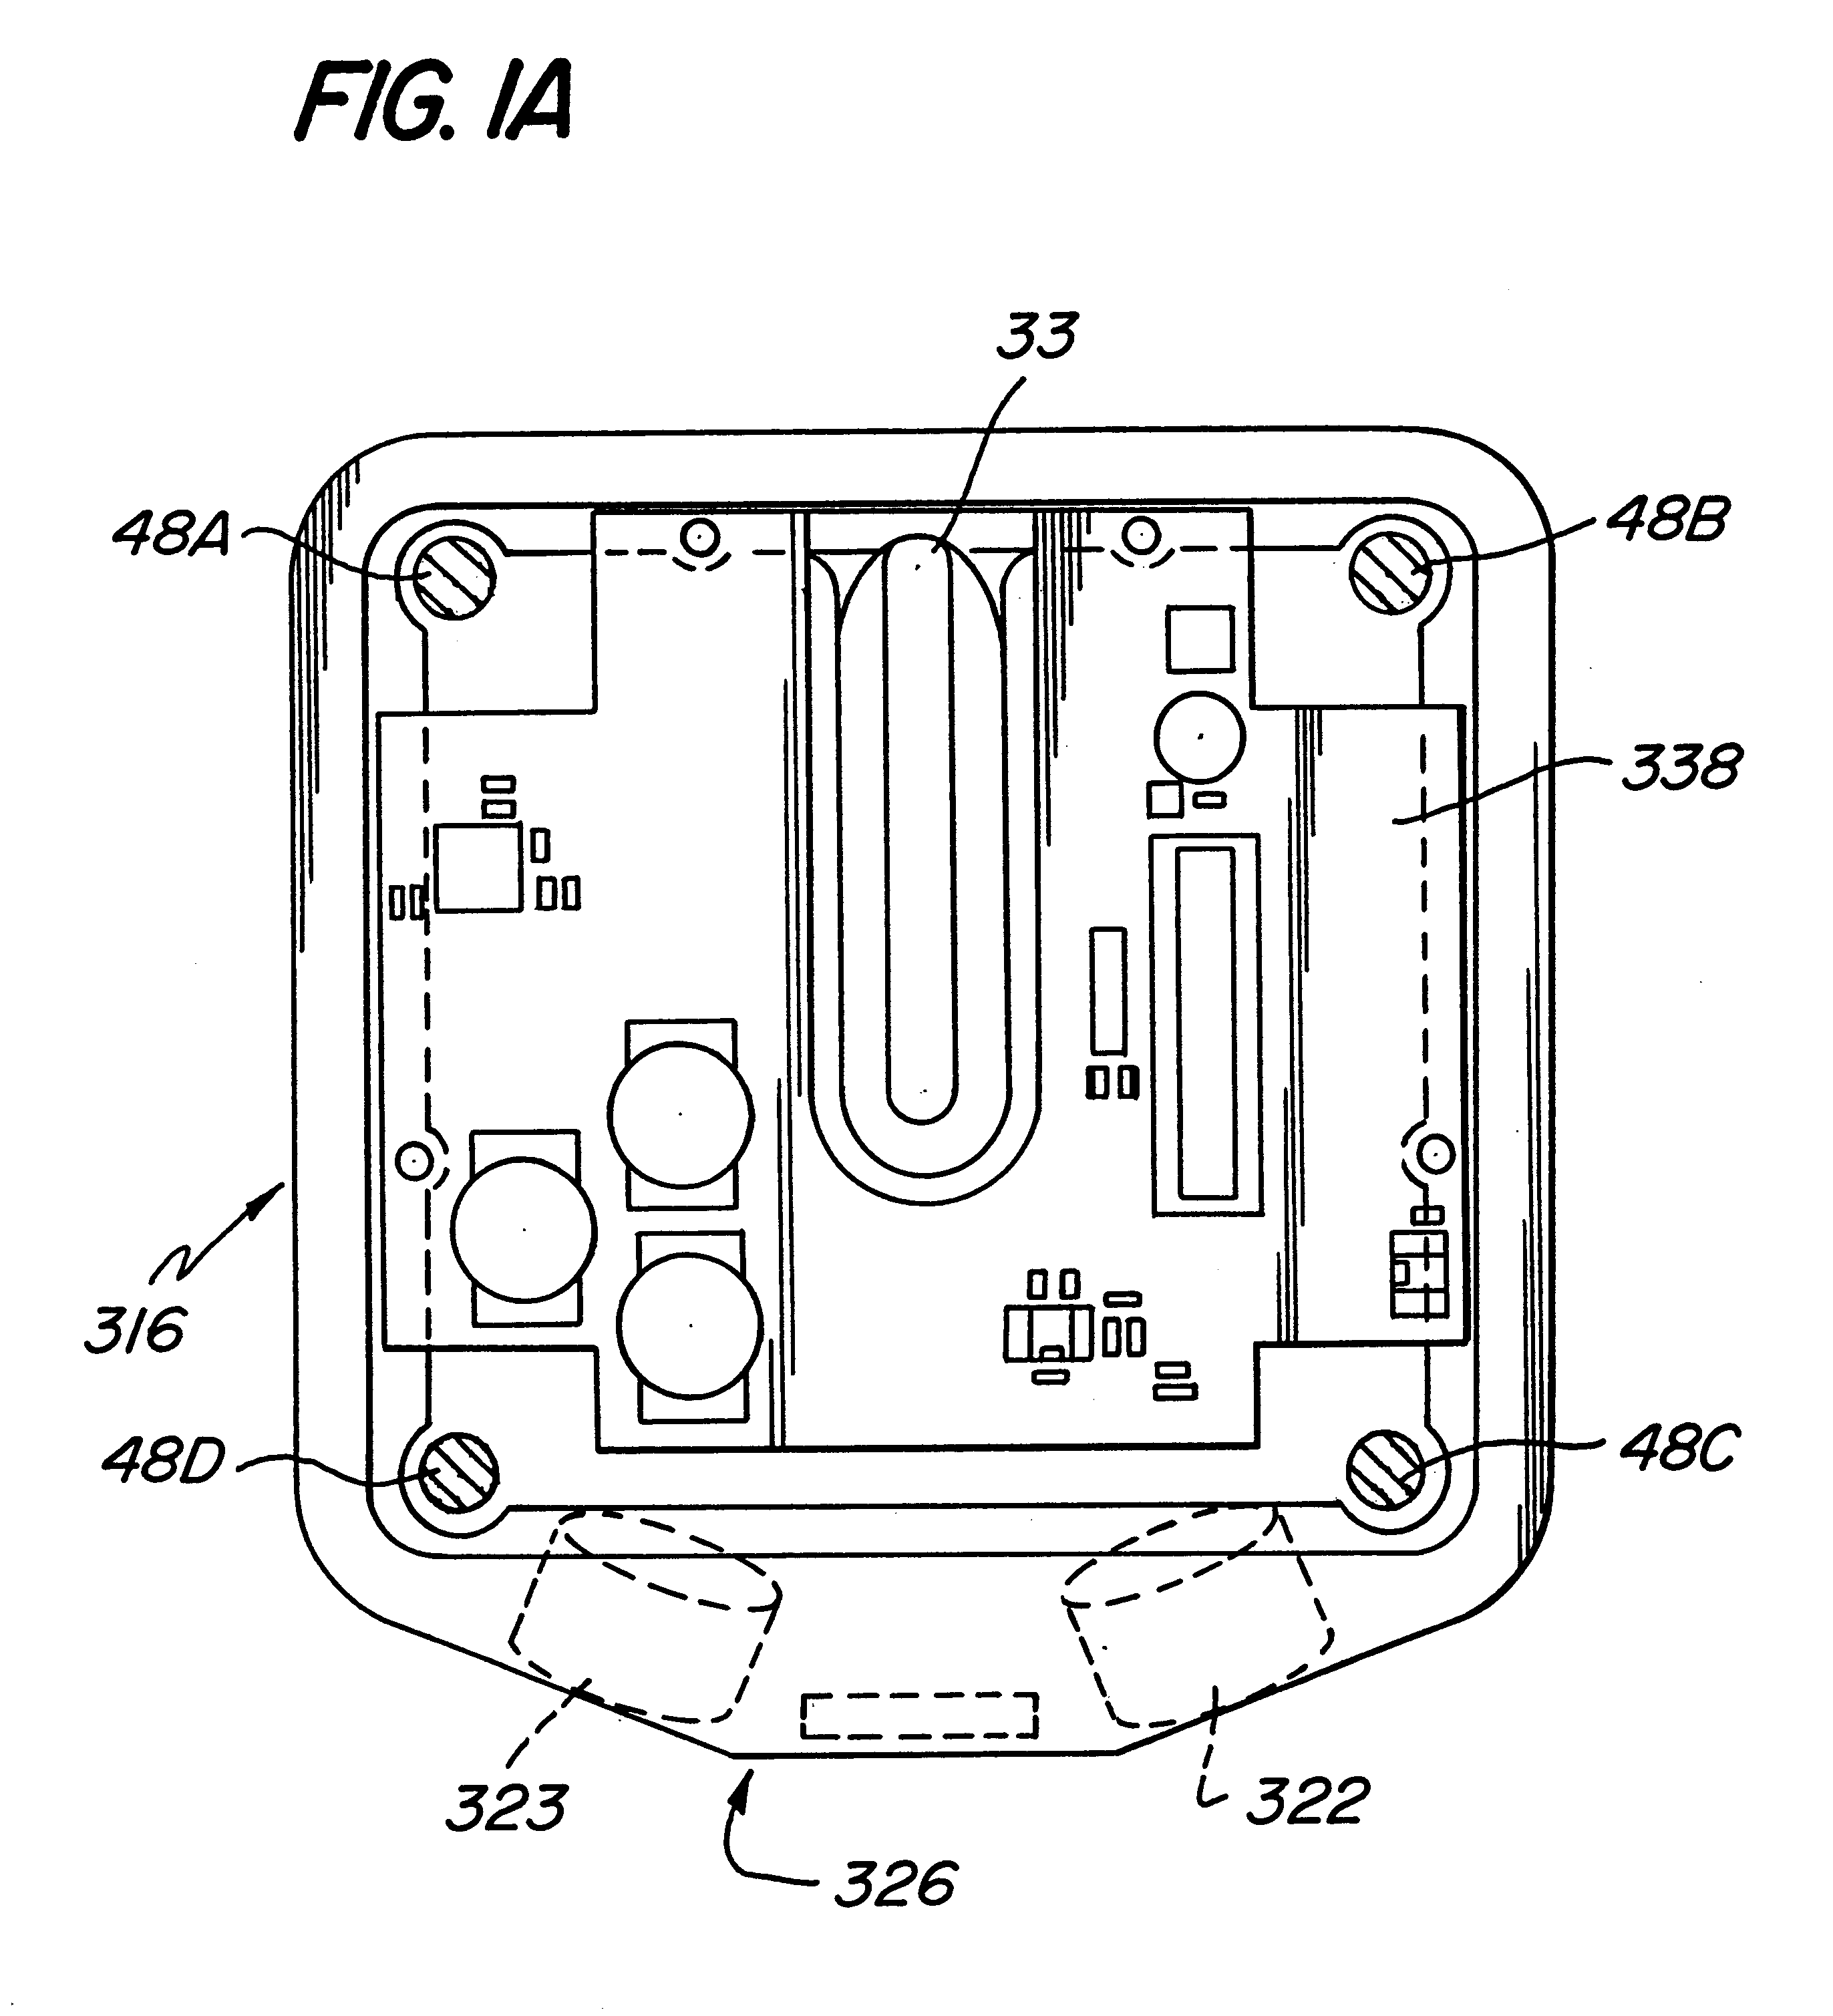 Vehicle-detecting unit for use with electronic parking meter